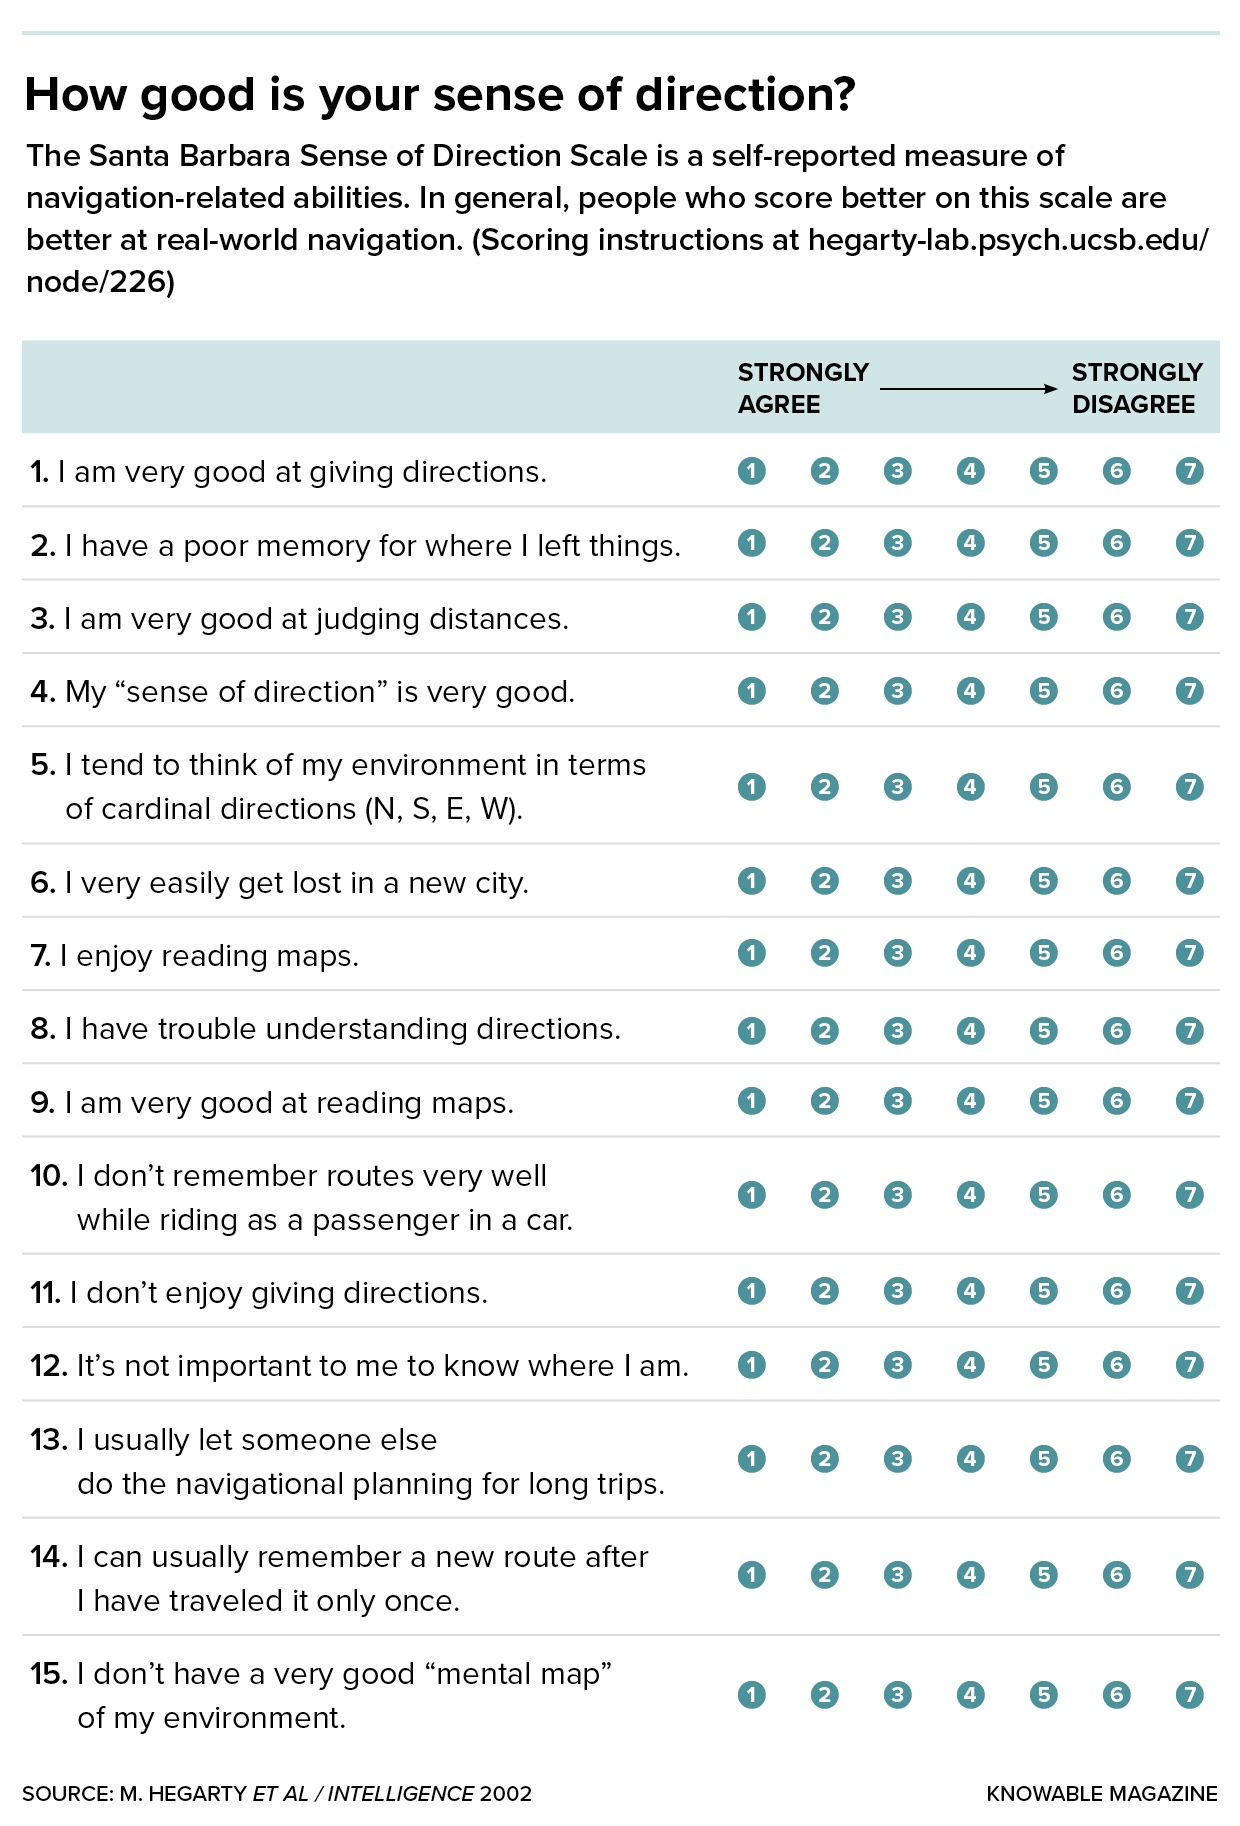 Image of a "why people get lost" self-assessment questionnaire with questions rated on a scale from "strongly agree" to "strongly disagree.